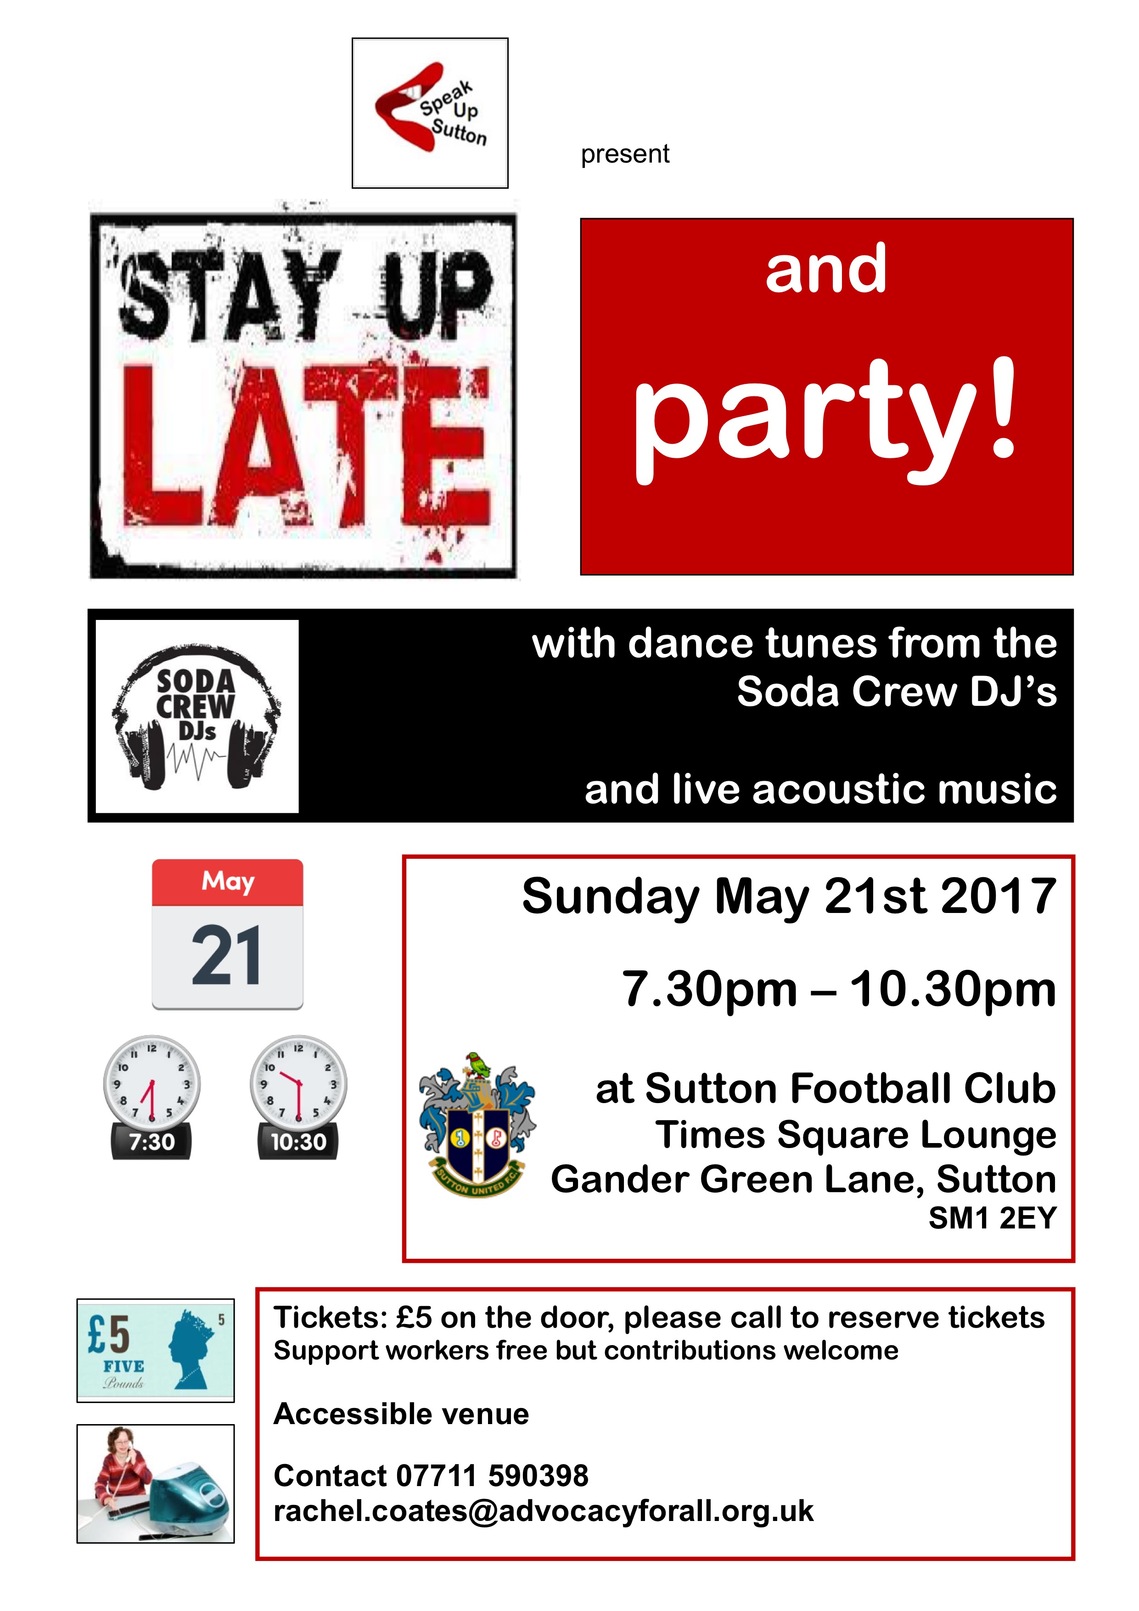 Stay up Late Speak Up Sutton poster